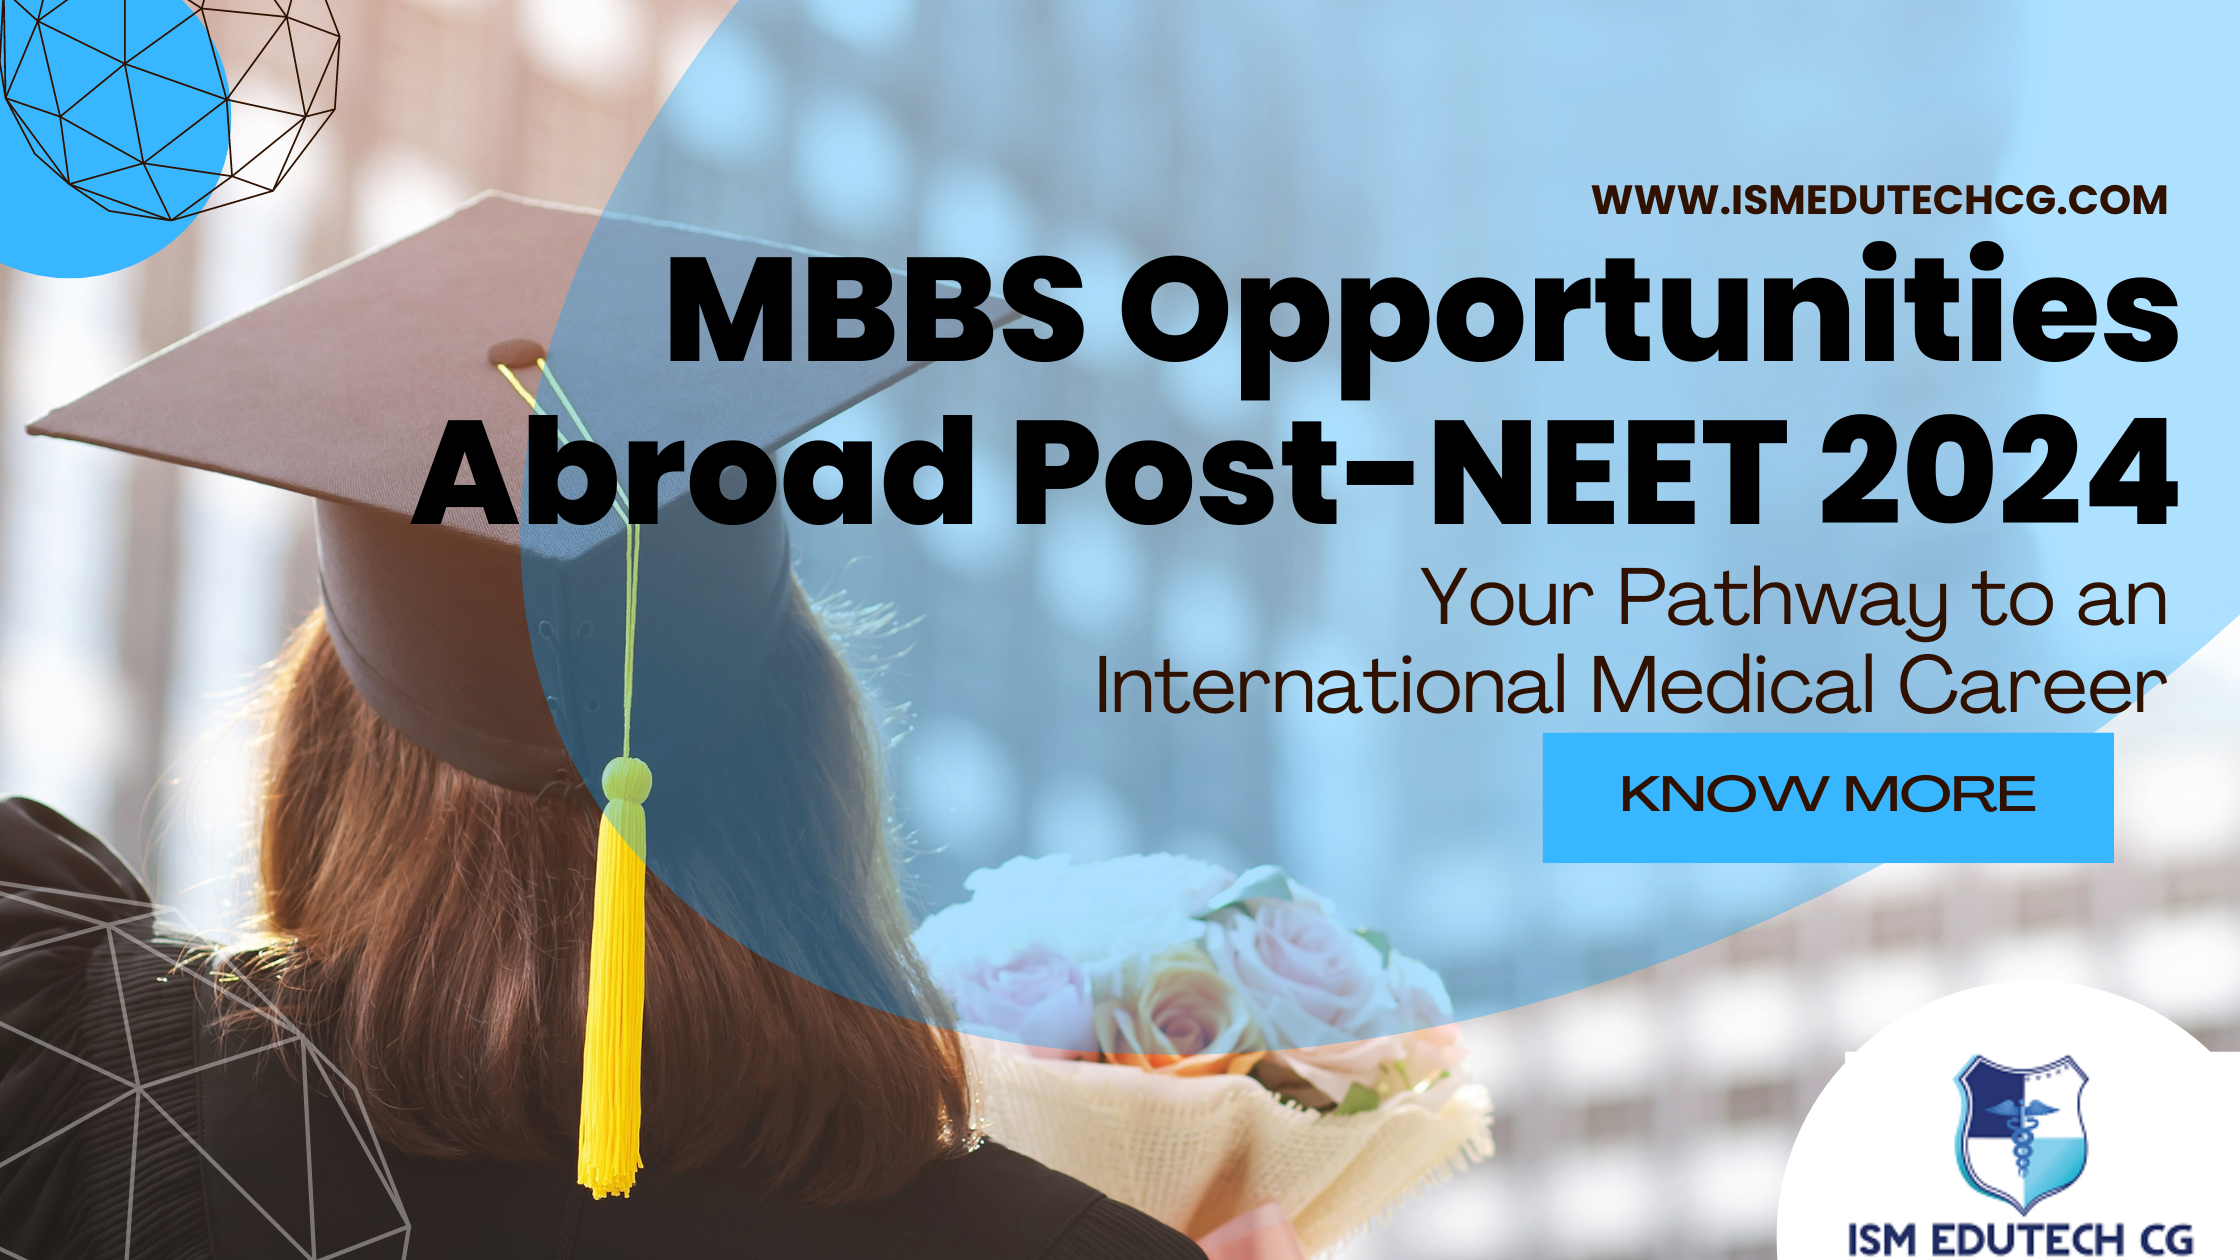 Your Pathway to an International Medical Career: MBBS Opportunities Abroad Post-NEET 2024